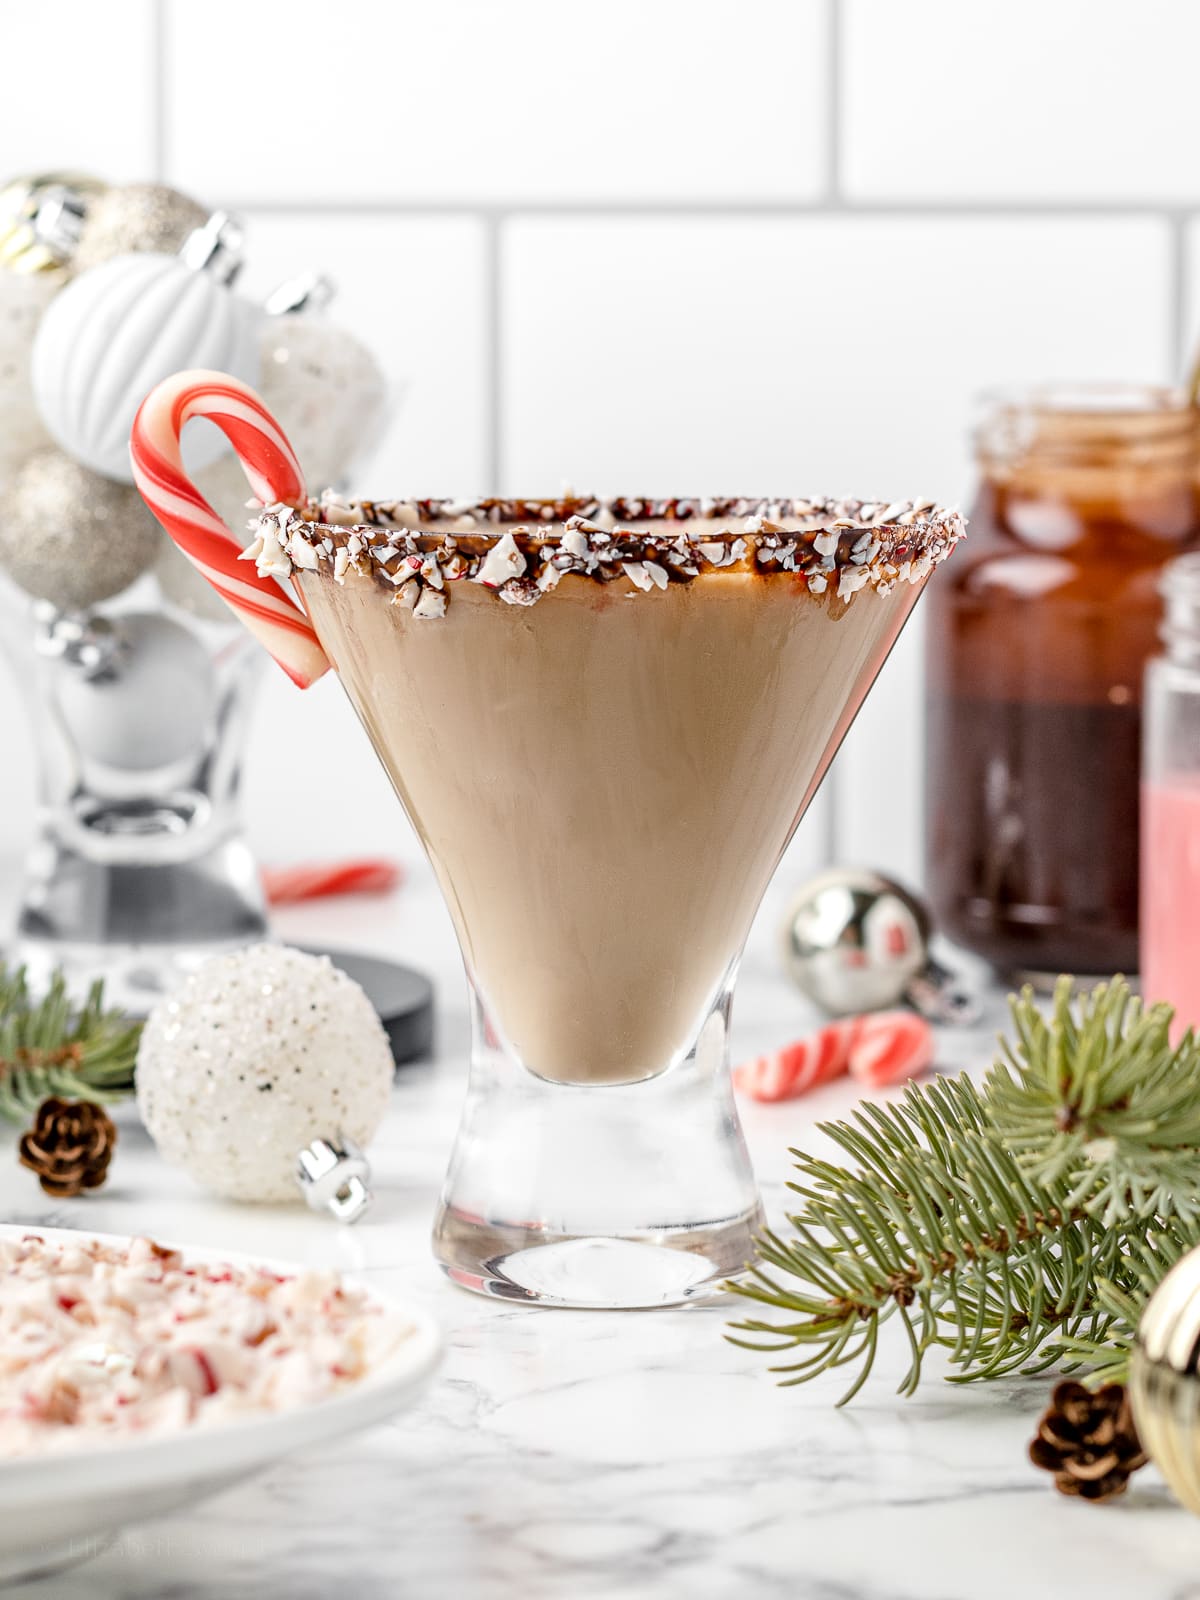 Peppermint White Russian Mocktail surrounded by crushed candy canes, chocolate syrup, peppermint syrup, candy canes, Christmas ornaments and pine trees